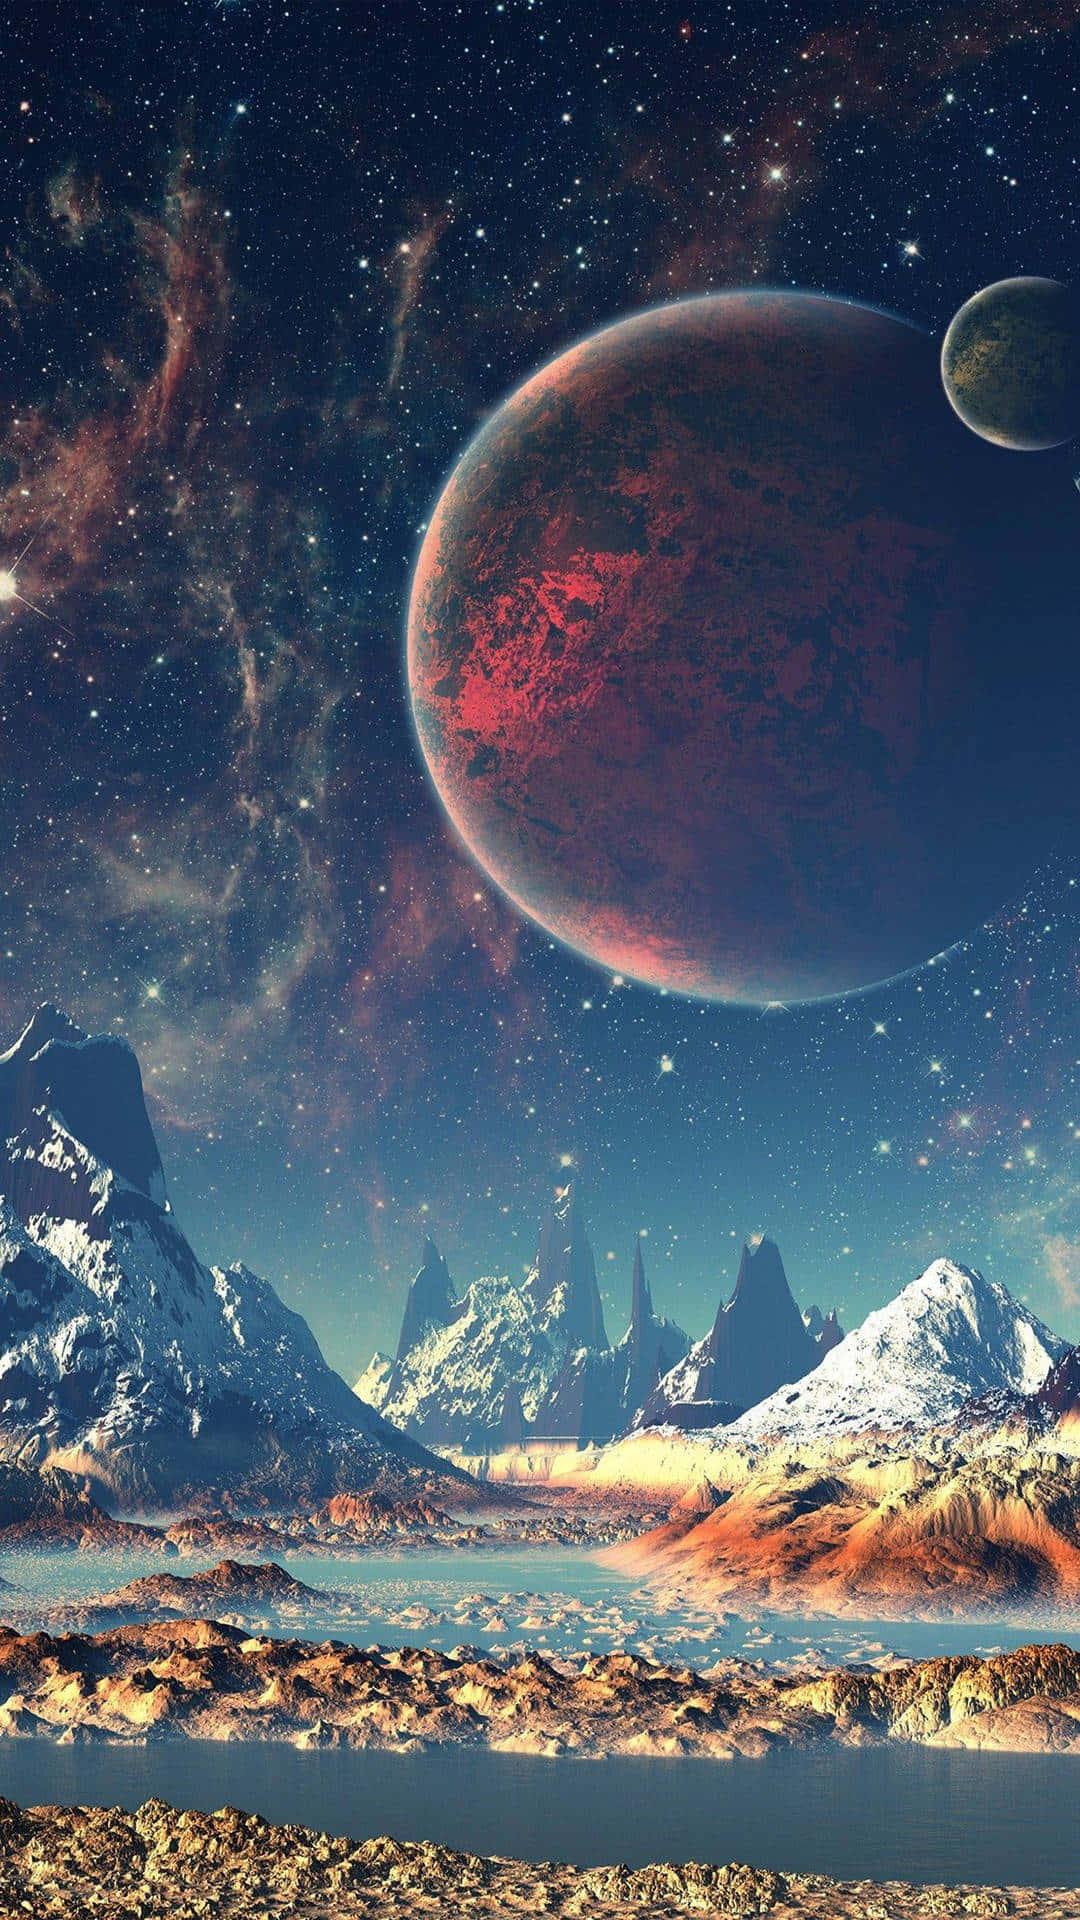 Galaxy Space Icy Mountains Digital Art Phone Background